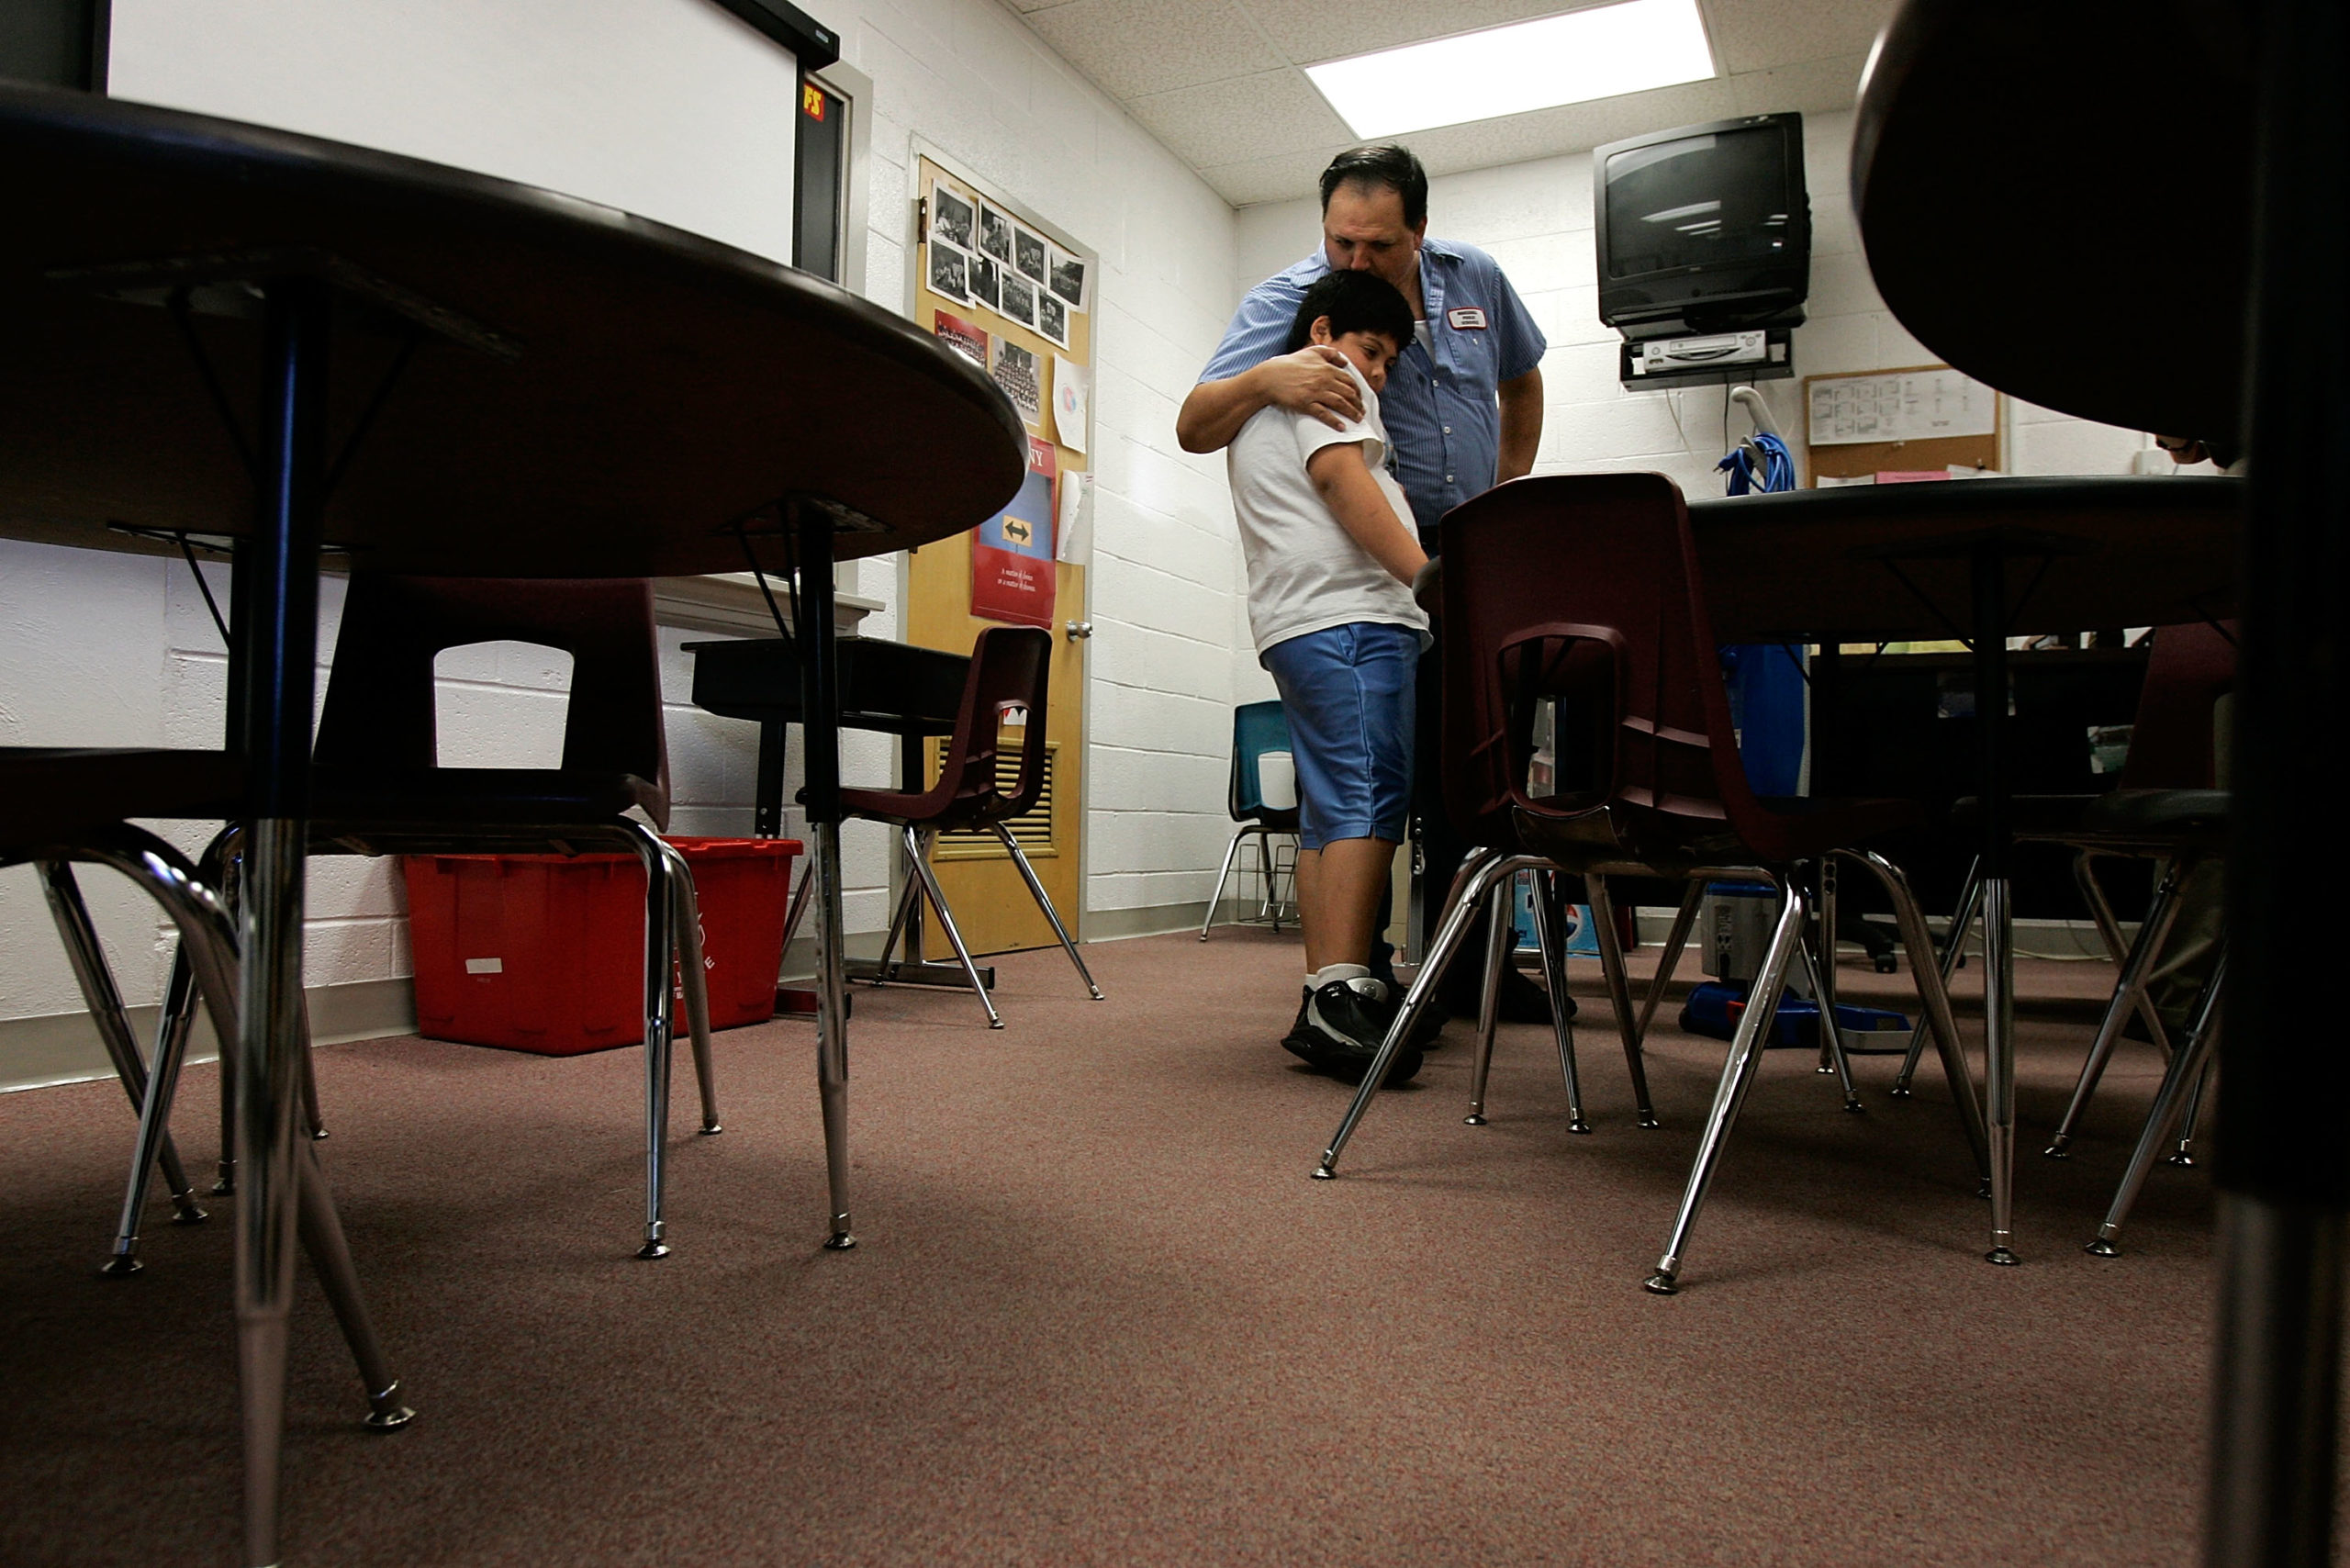 Custodian Francisco ?Paco? Inzunza (R) hugs his younger son Anthony (L), who is a fifth grader at the same school, in a classroom at Bueker Middle School September 27, 2005 in Marshall, Missouri. Paco illegally came to the United States to pursue his American dream from Mexico in 1991. After he and his family had settled in Marshall, he learned English for 3 years and started helping members of the local Latino community to translate for their daily lives. He was forced to admit his illegal statues when he was involved in a murder case as a translator and a witness. Paco is very well received by the people in his town because of his involvement in helping others. He also works very hard to support his own family. Many of his supporters had testified for him at his deportation hearing and tried to lobby for a law change before the next time he has to go back to court on February 13, 2007, so Paco can stay in the United States permanently. (Photo by Alex Wong/Getty Images)